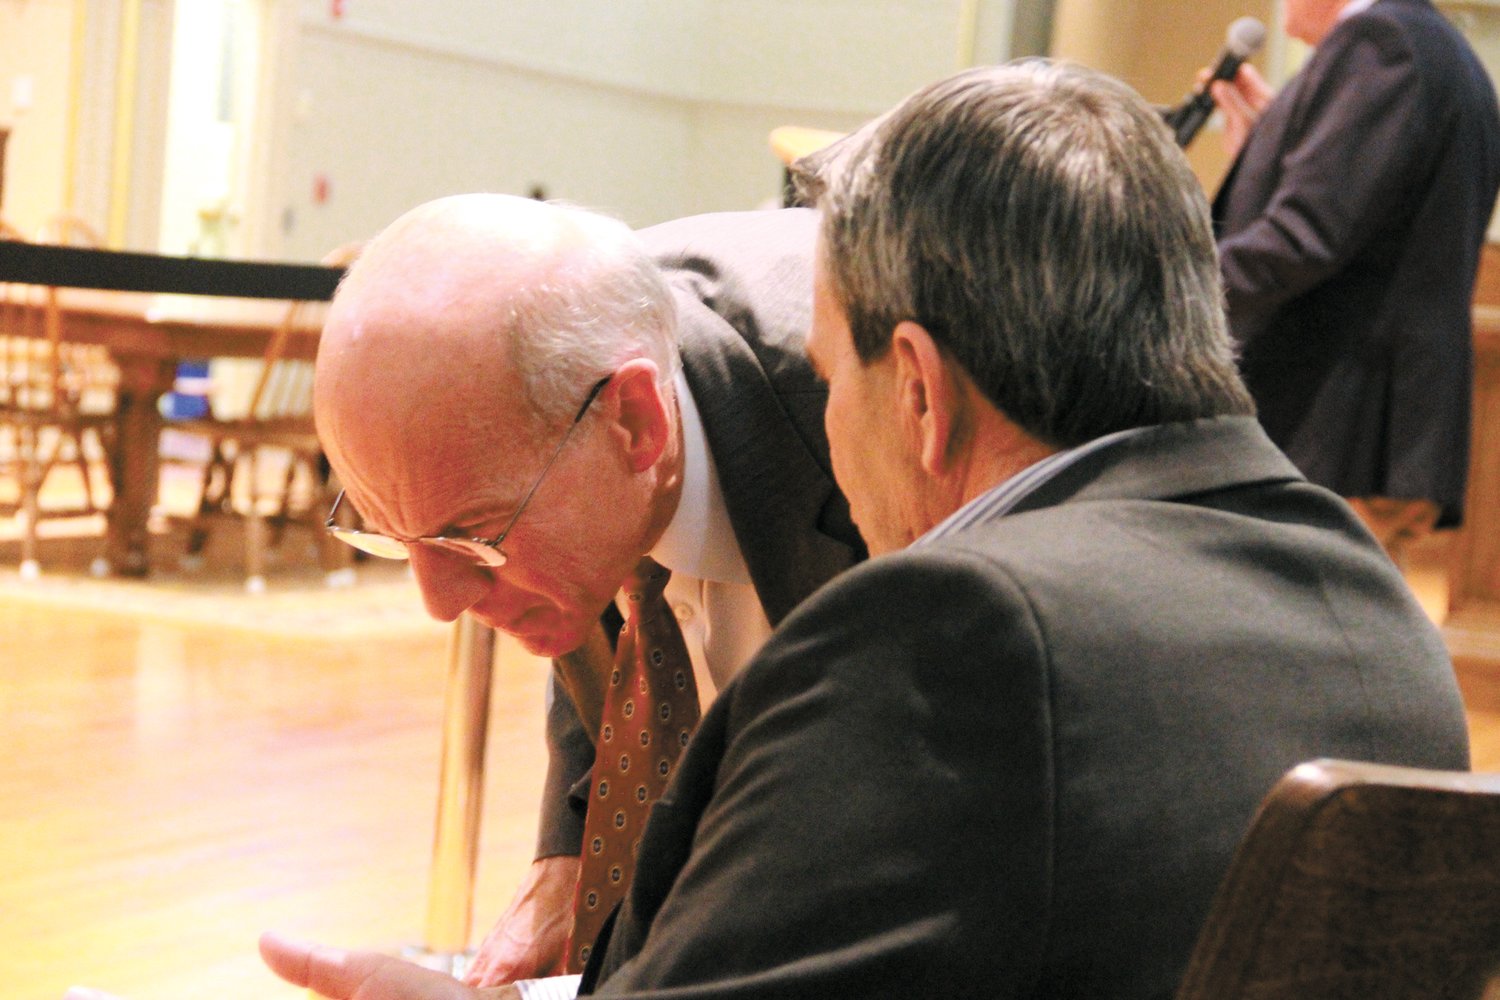 THE FINE POINTS: City Solicitor Michael Ursillo and Mayor Frank Picozzi confer during the hearing. (Warwick Beacon photos)